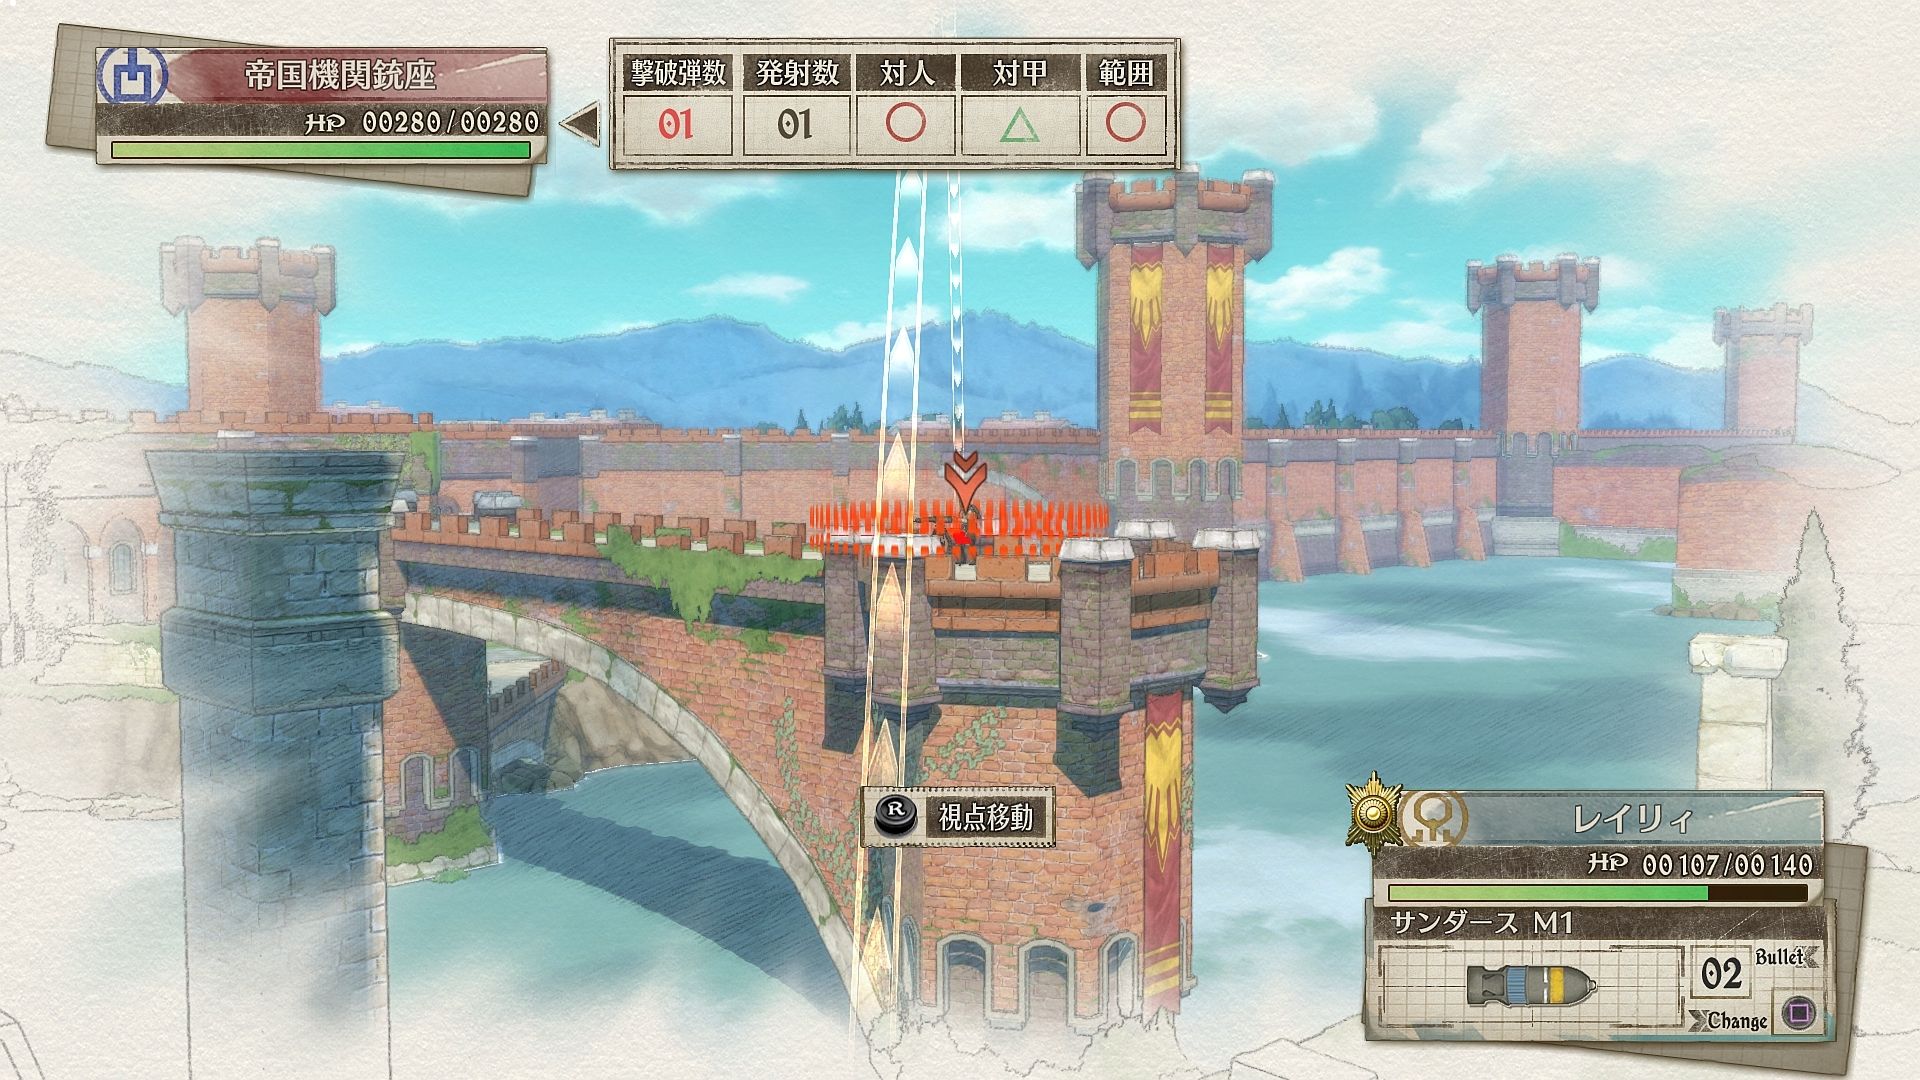 http://www.perfectly-nintendo.com/wp-content/gallery/valkyria-chronicles-4-27-12-2017/44.jpg